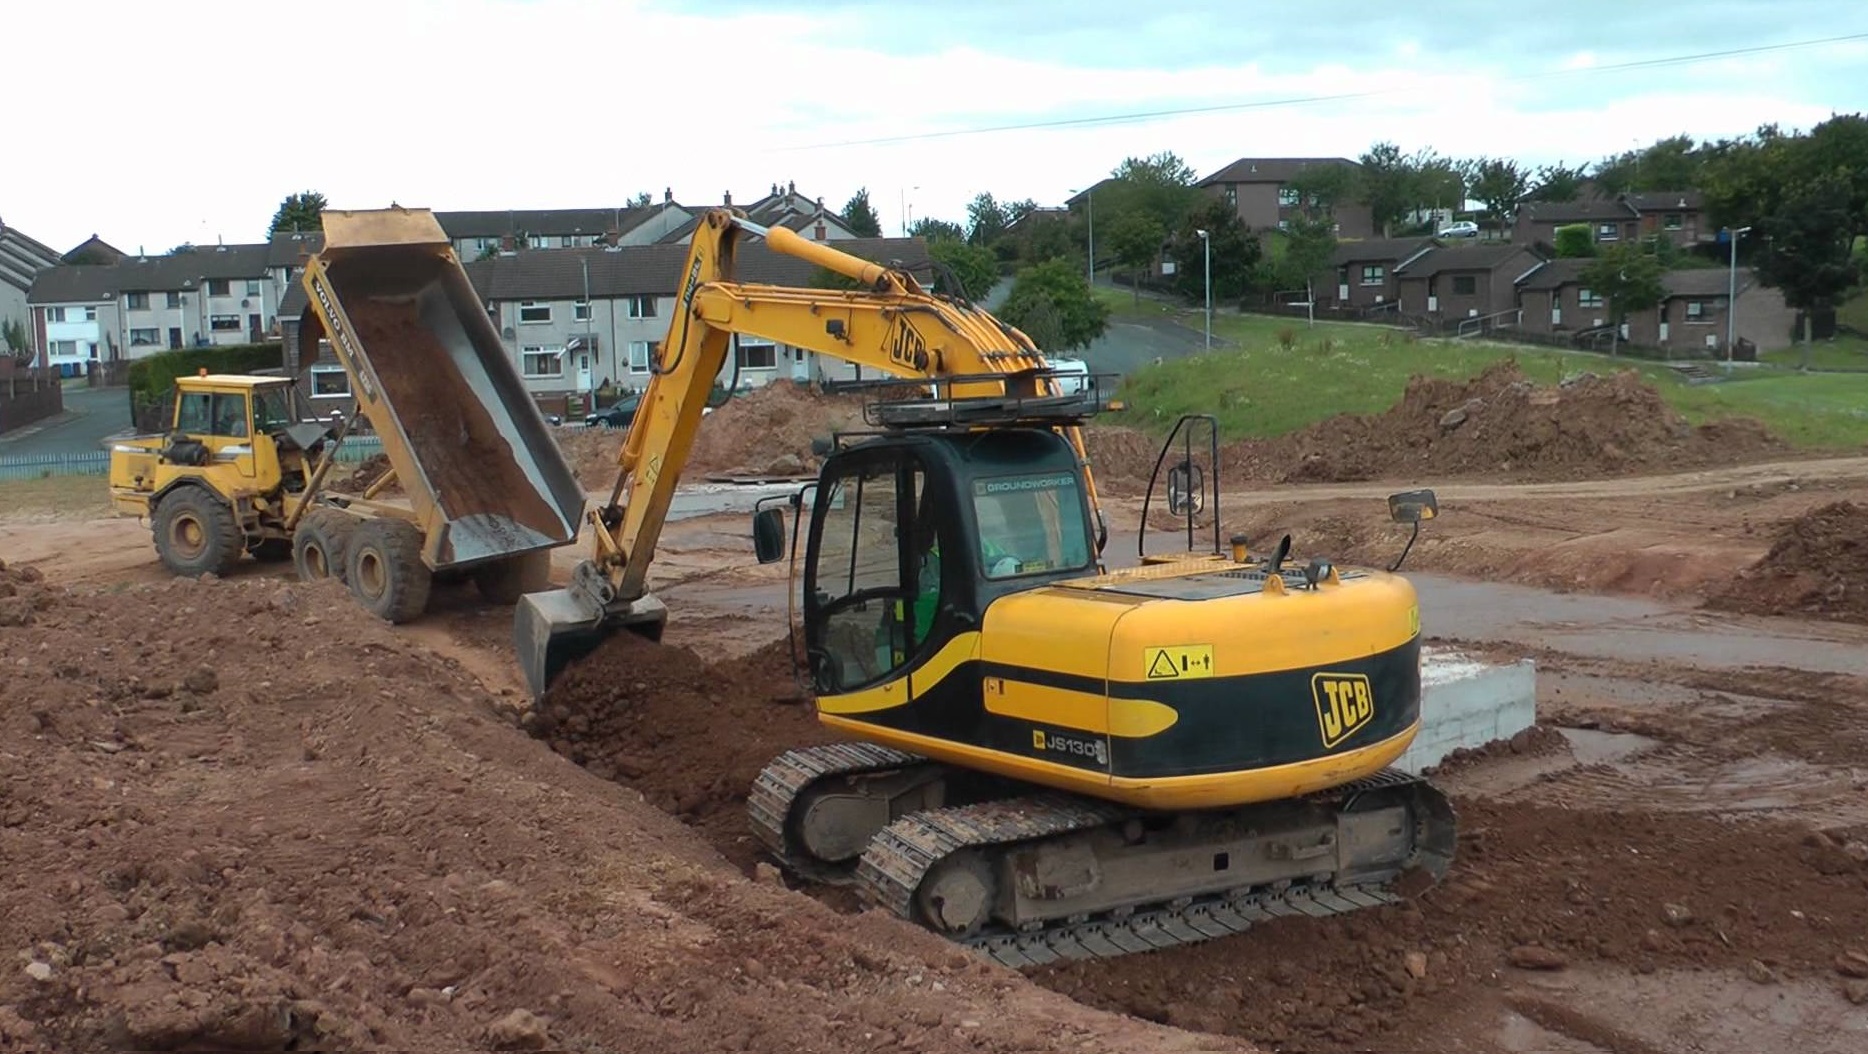 The deal includes includes a fleet of 13-tonne JS130 tracked excavators